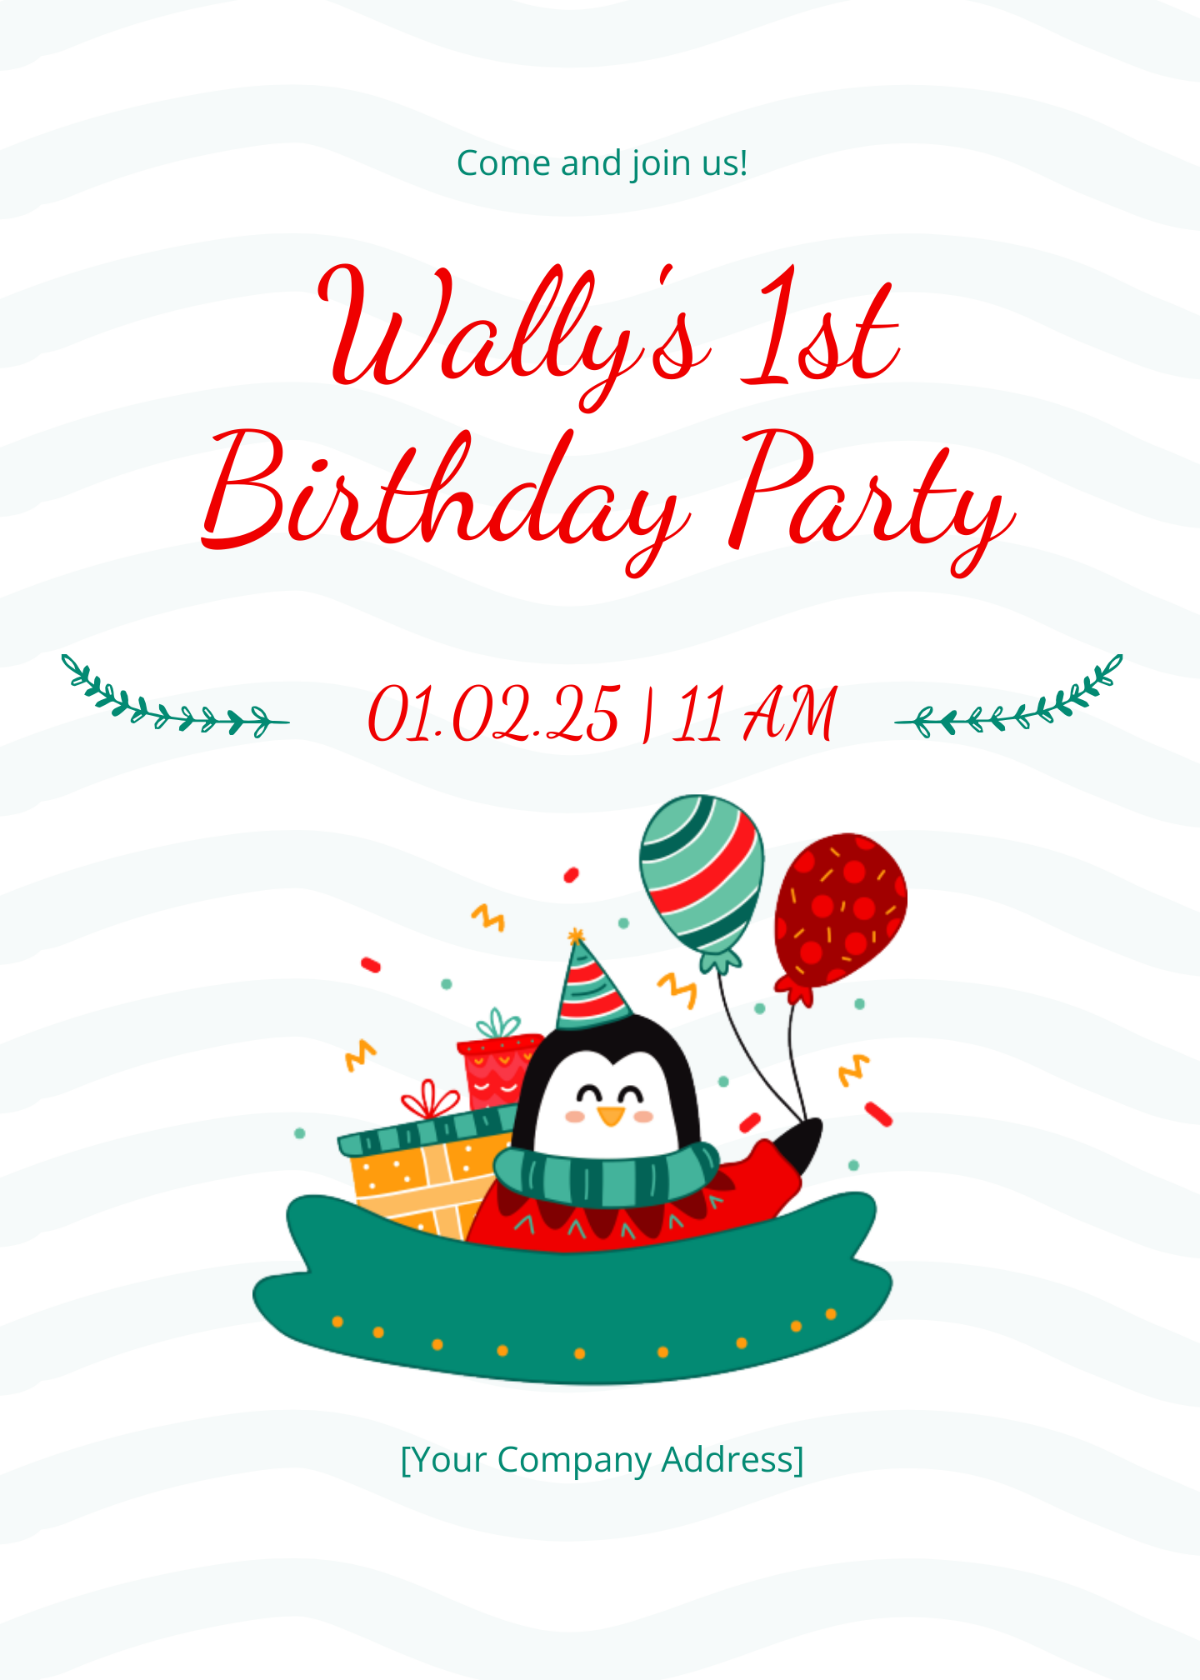 FREE Birthday Invitation Templates & Examples - Edit Online & Download